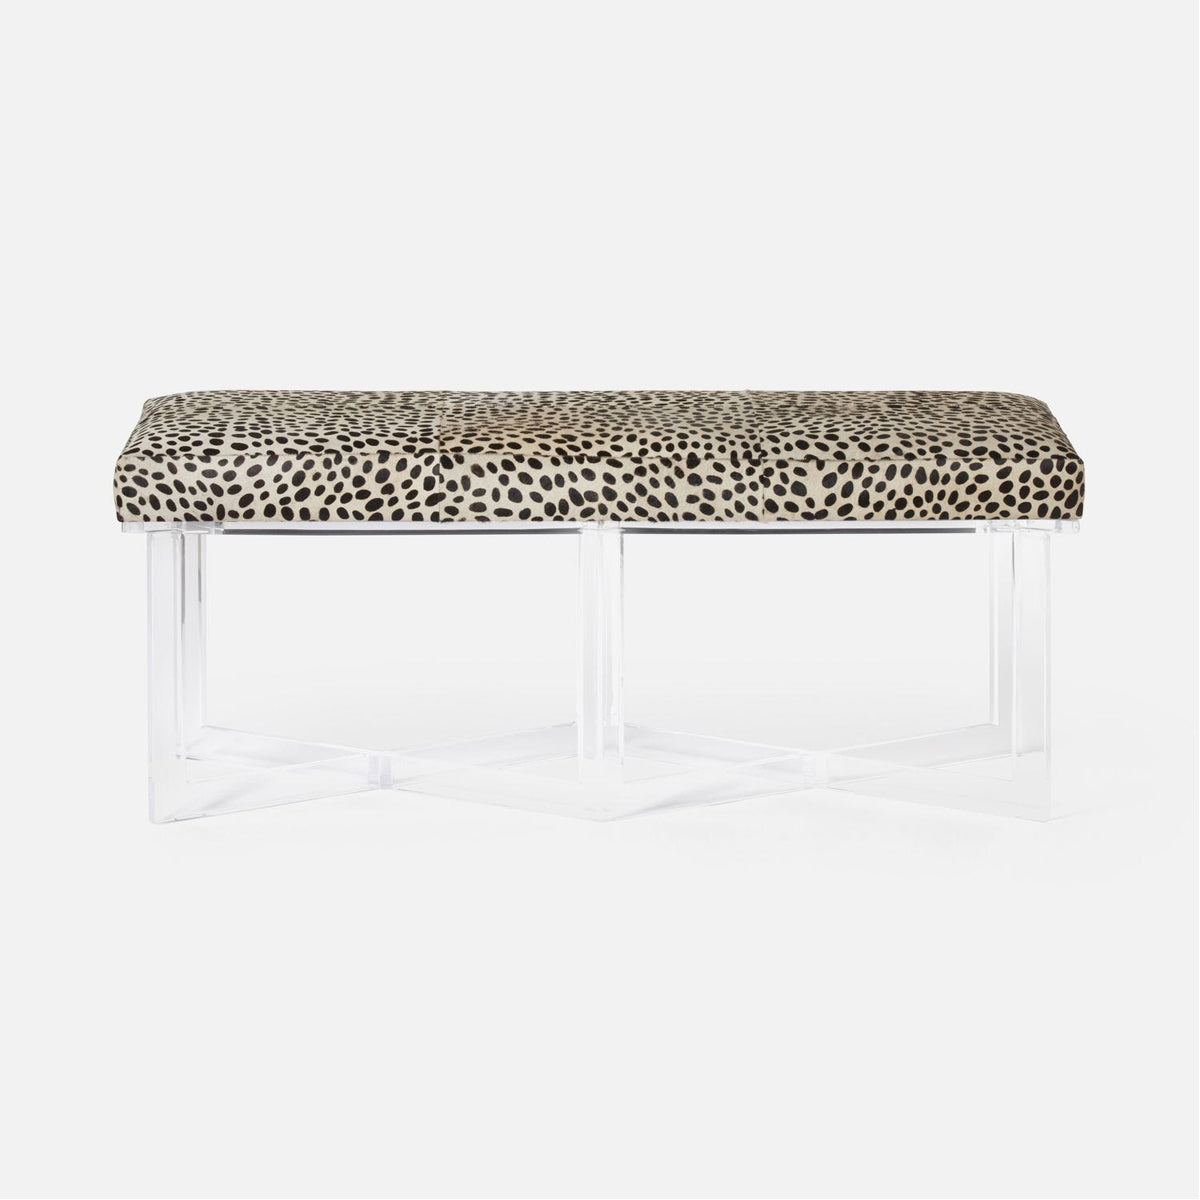 Made Goods Lex Clear Acrylic Double Bench, Pagua Fabric